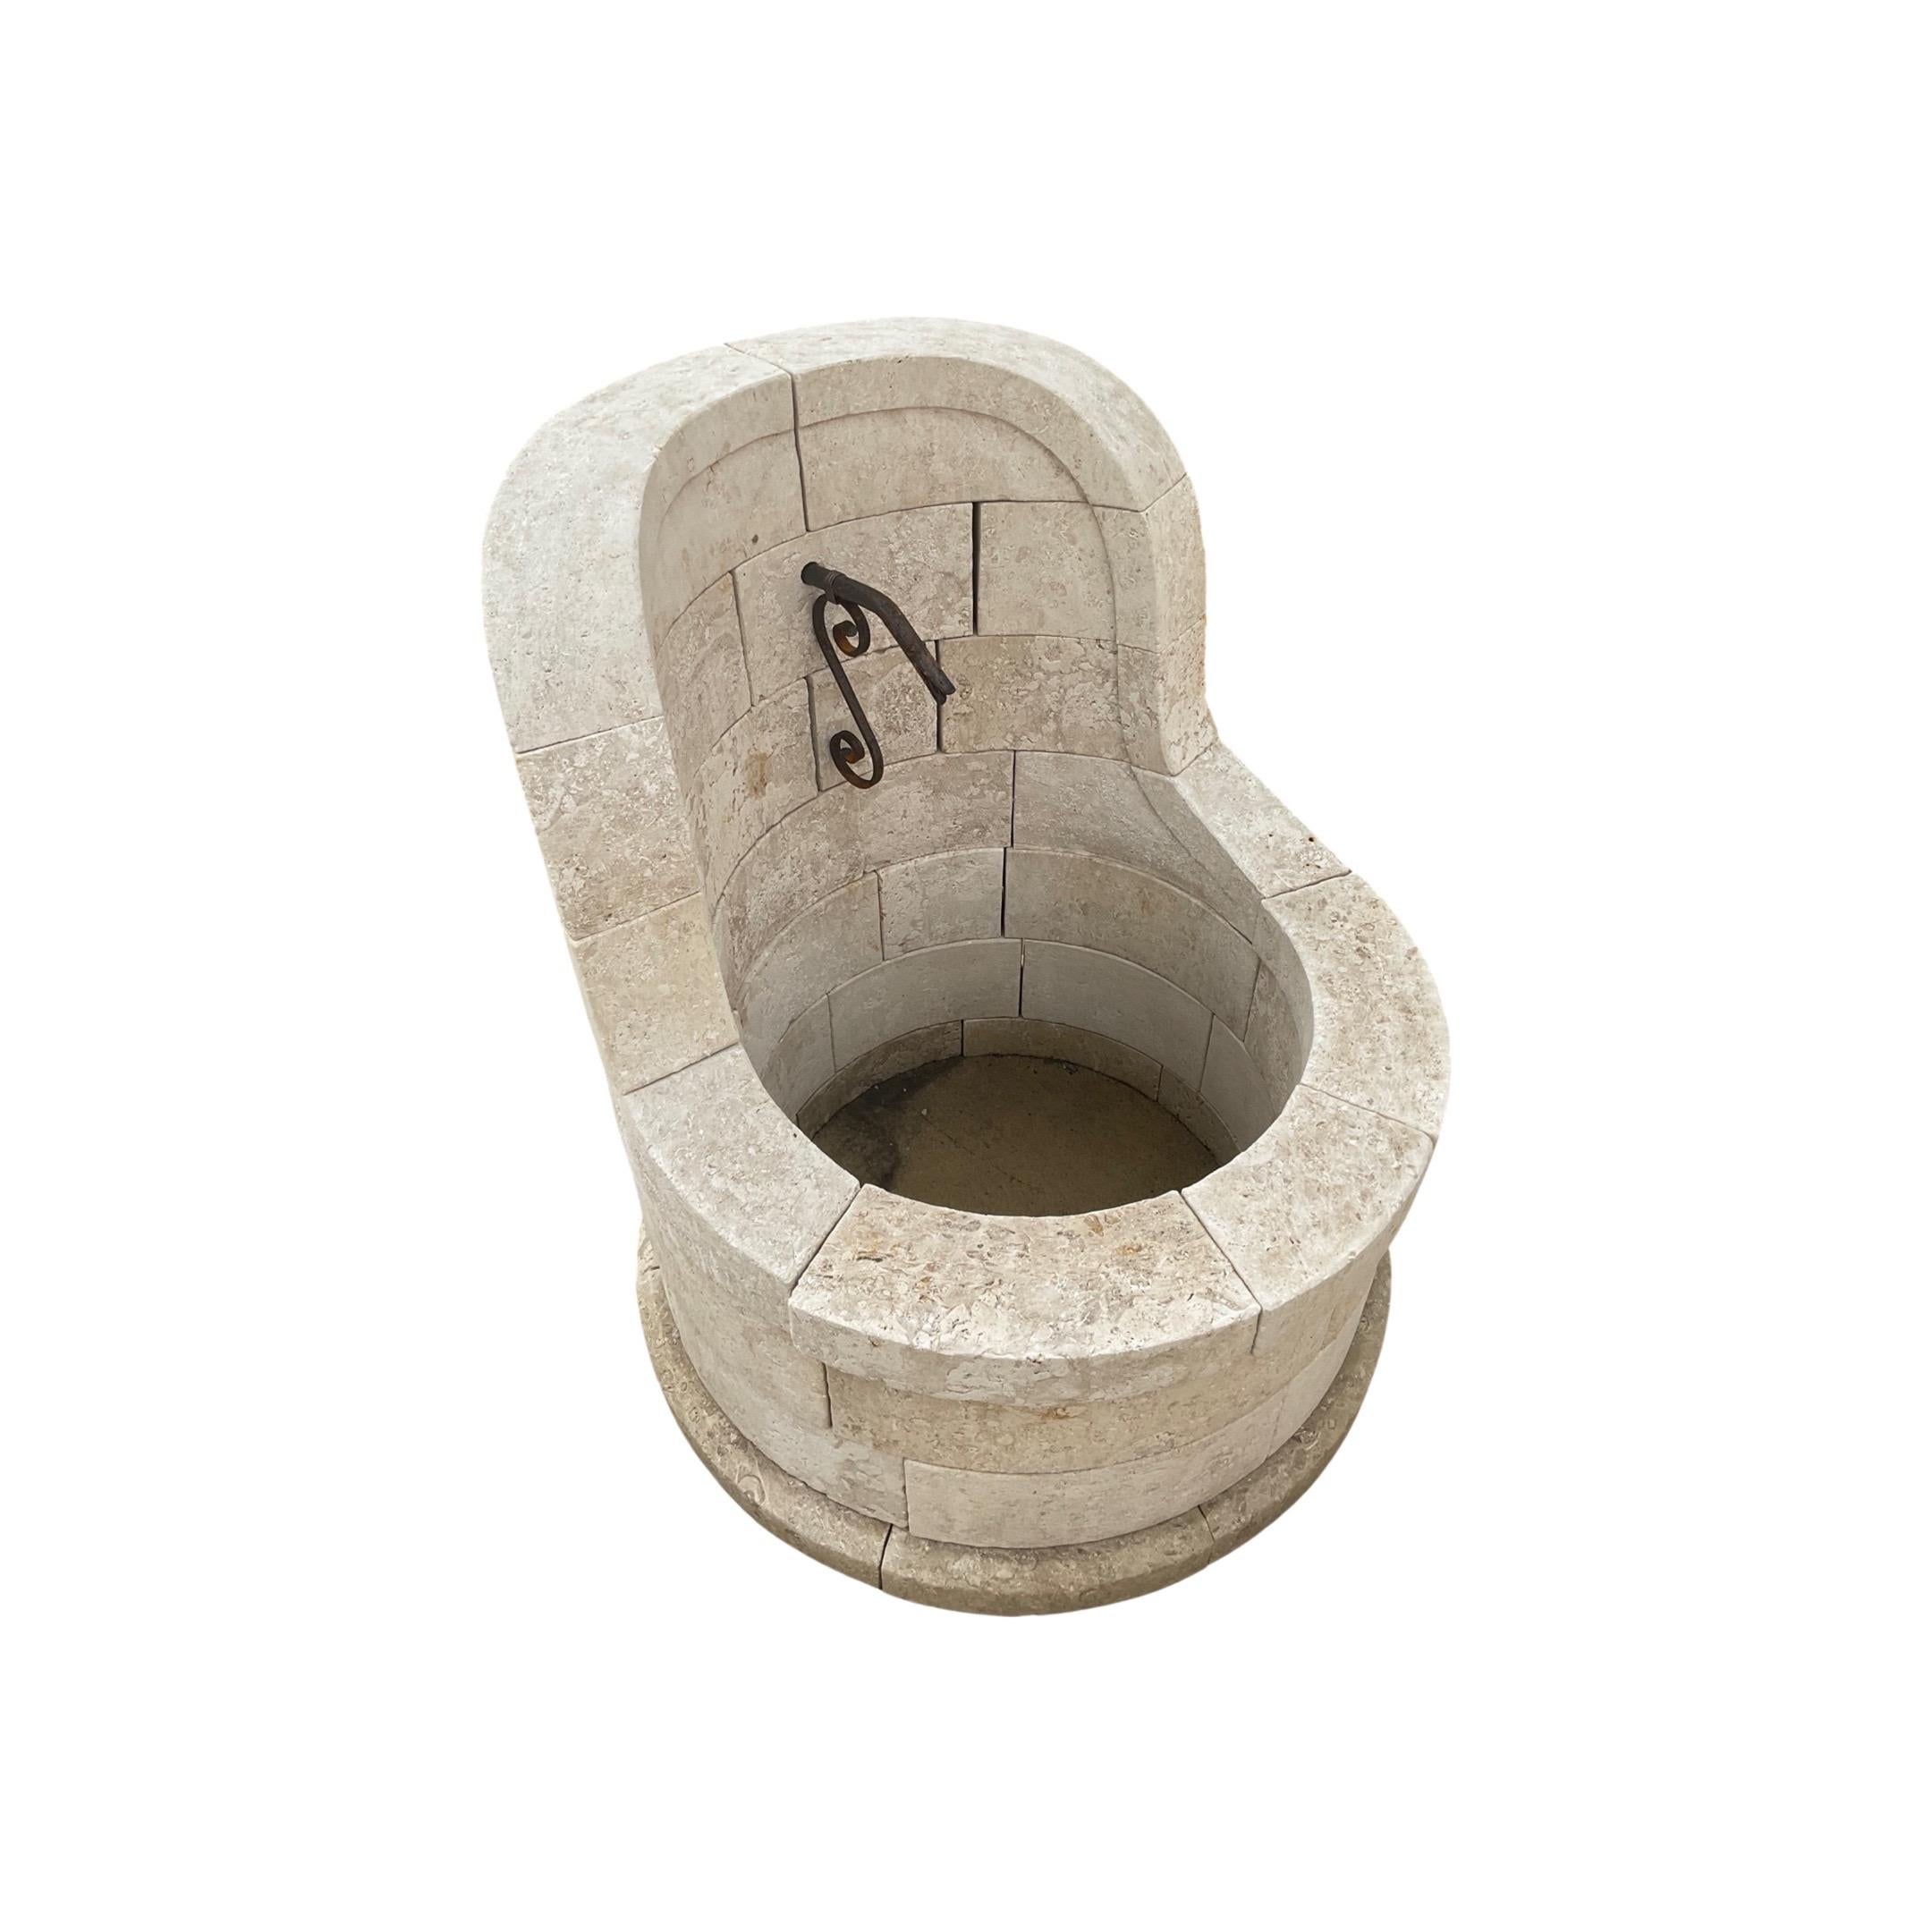 This French Limestone Fountain is a stunning addition to any garden. Made with a circular round style trough from 18th century limestone, this fountain naturally captivates with its timeless aesthetic. Enjoy the calming sound of the one spout water